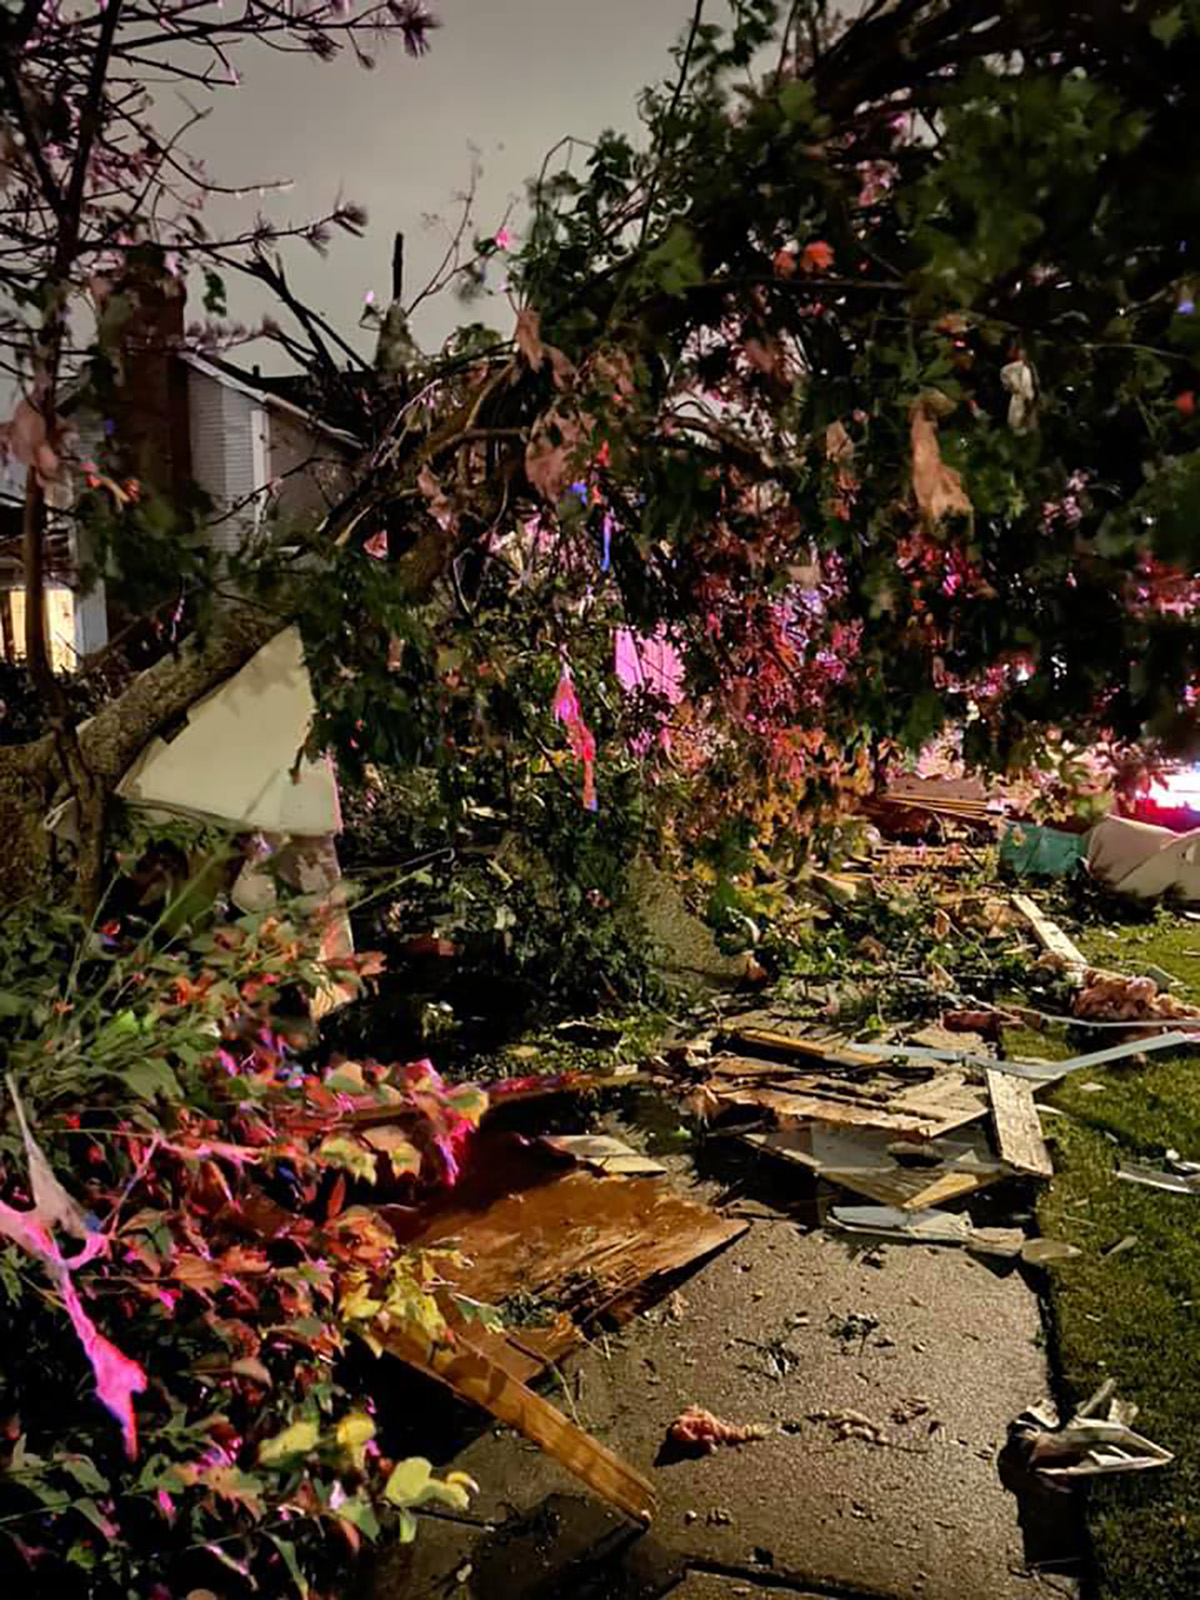 PHOTO: Debris is scattered after storm passed through Naperville, Illinois, June 21, 2021.